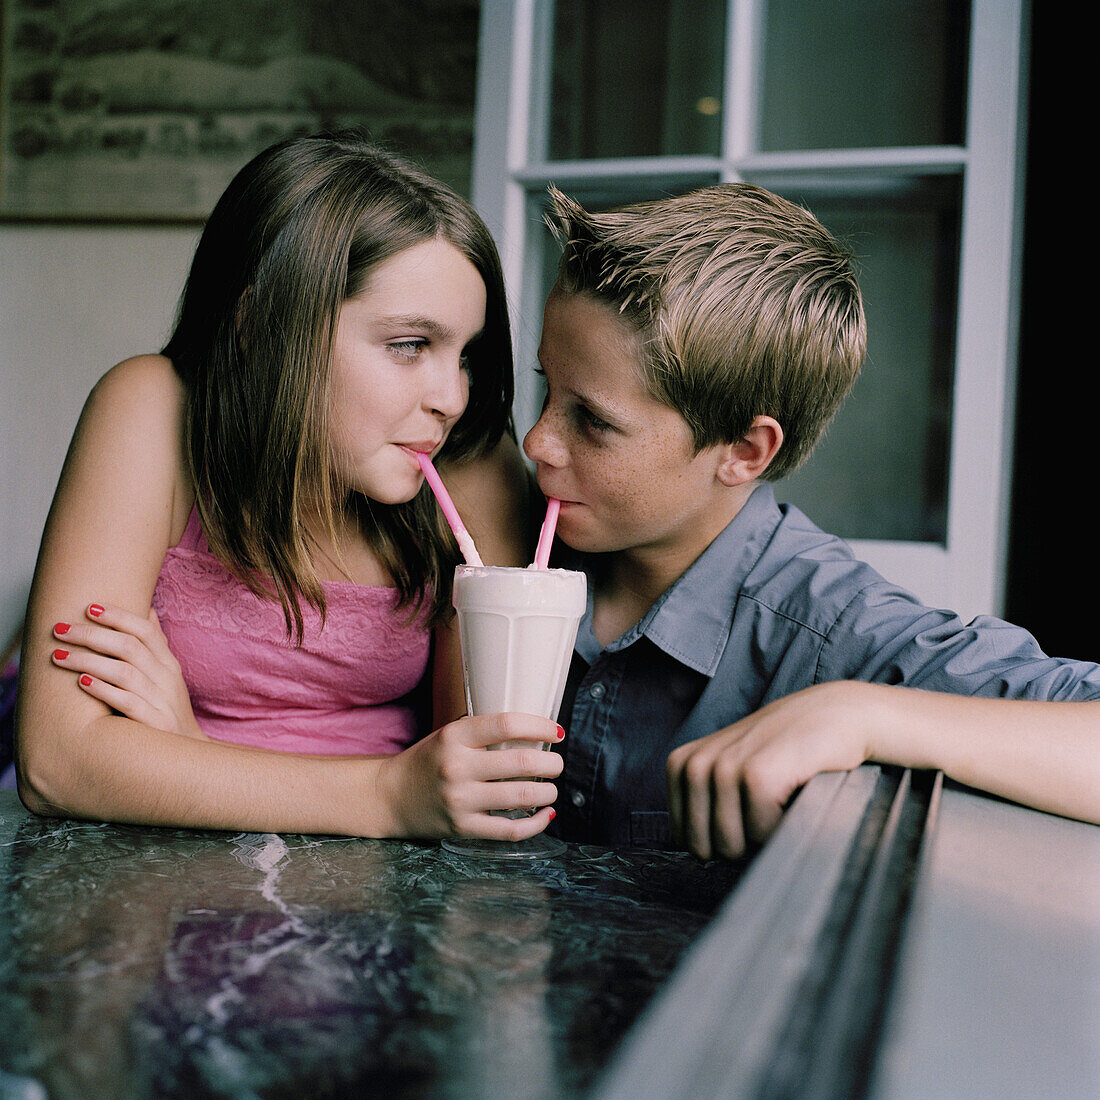 A young teenage couple sharing a milkshake at a diner